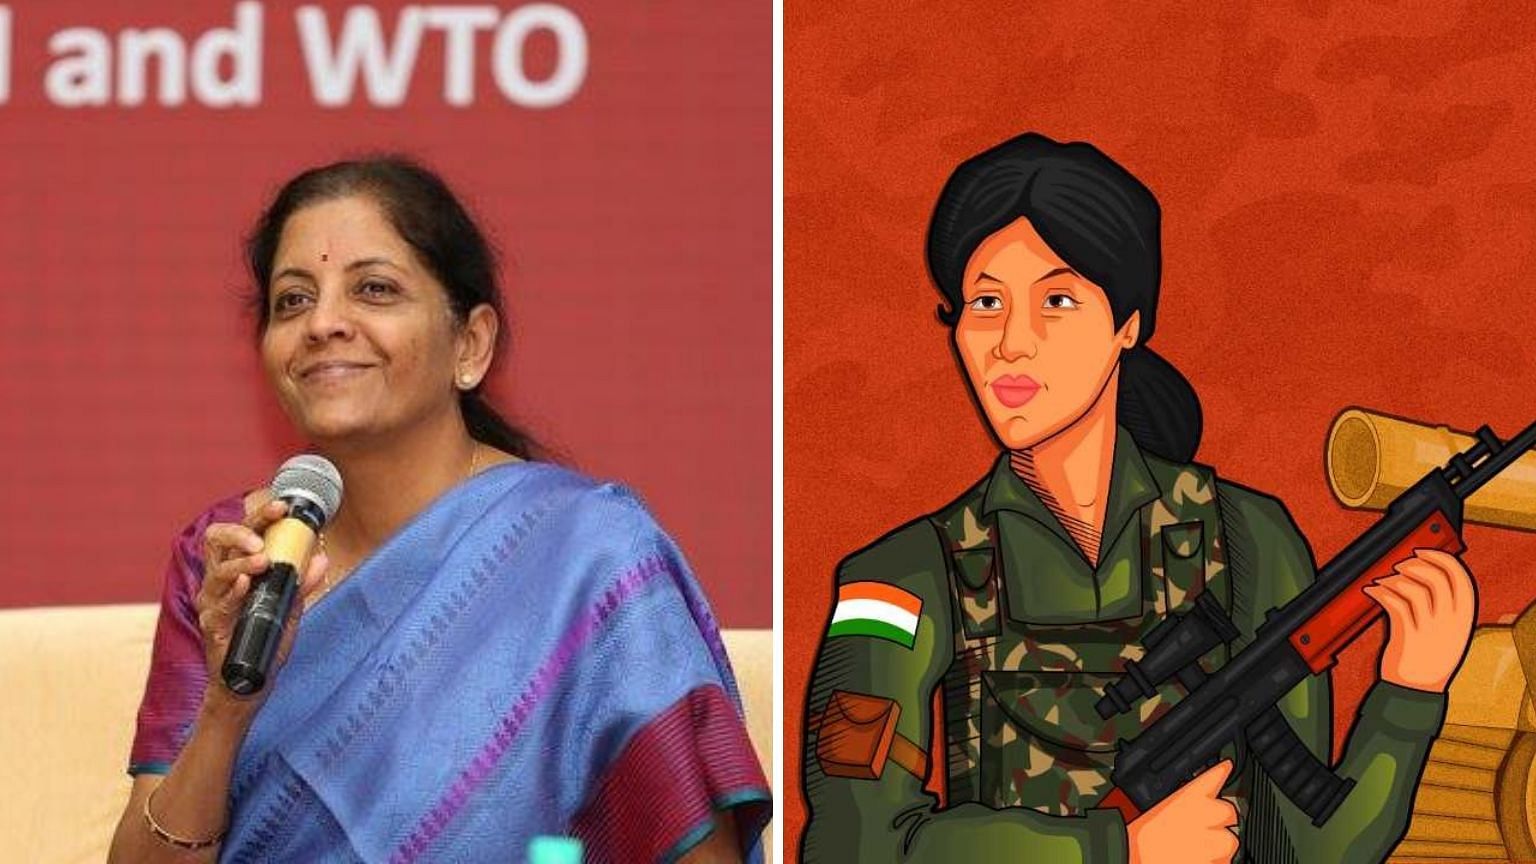 ‘Steps taken to ensure implementation of permanent commissioning of women officers in armed forces’ says MoD.